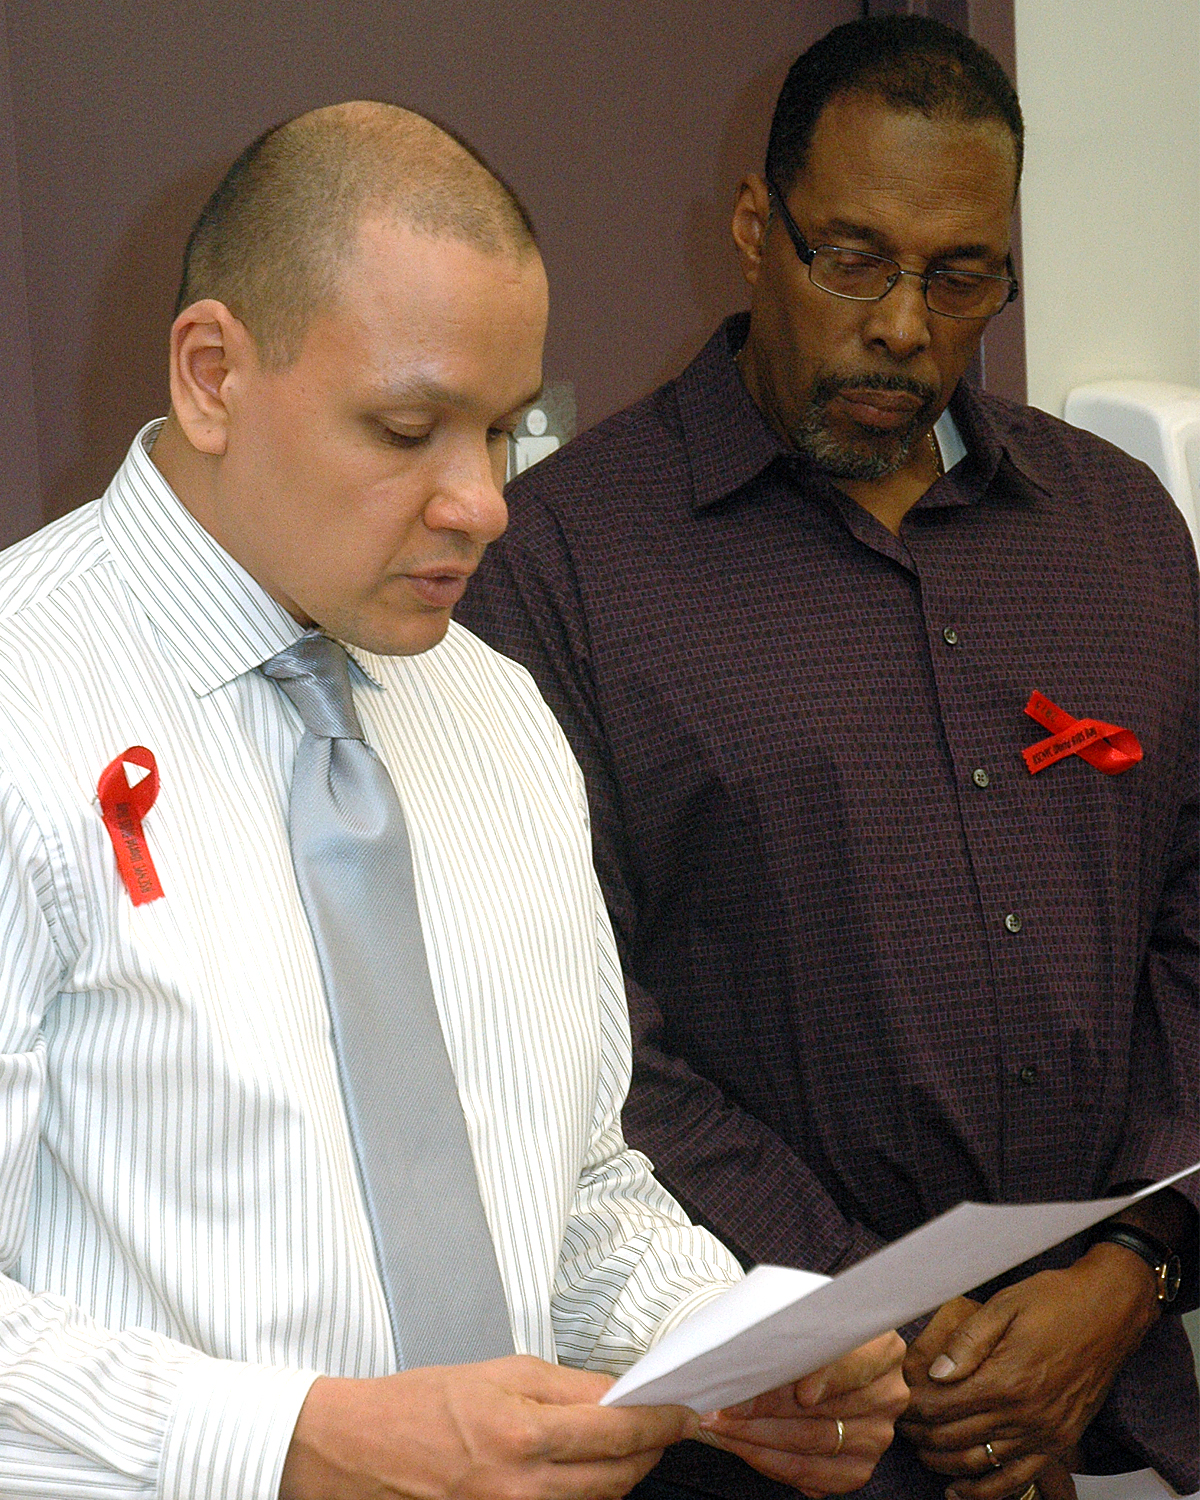 AIDS In Our Community: Reading Of Names - Ioannis Dunn Srimuang Boon and Derrick Horton